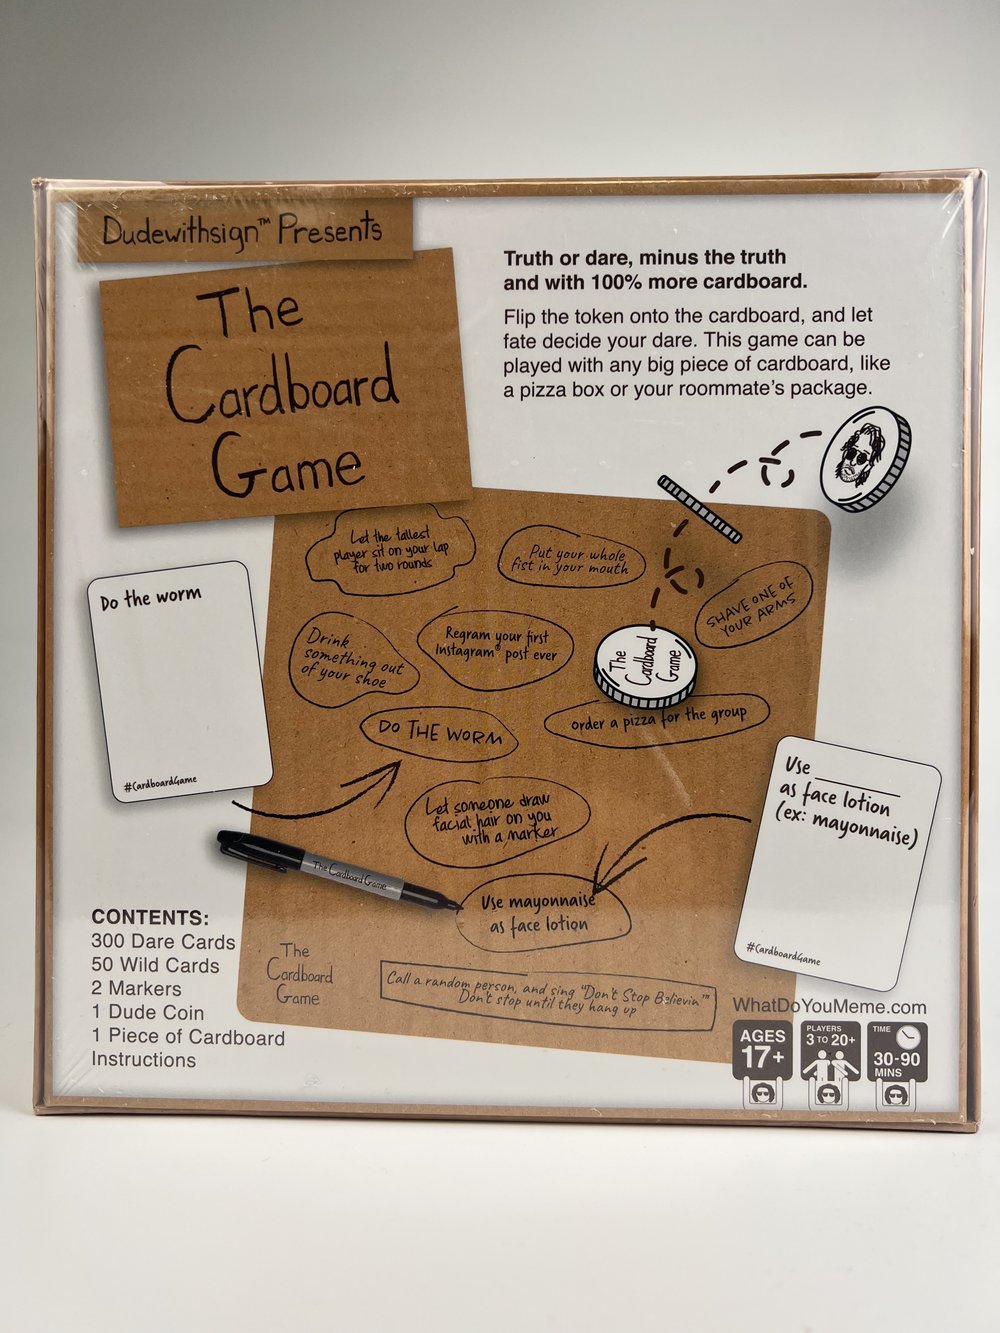  The Cardboard Game – The Party Game of Ridiculous